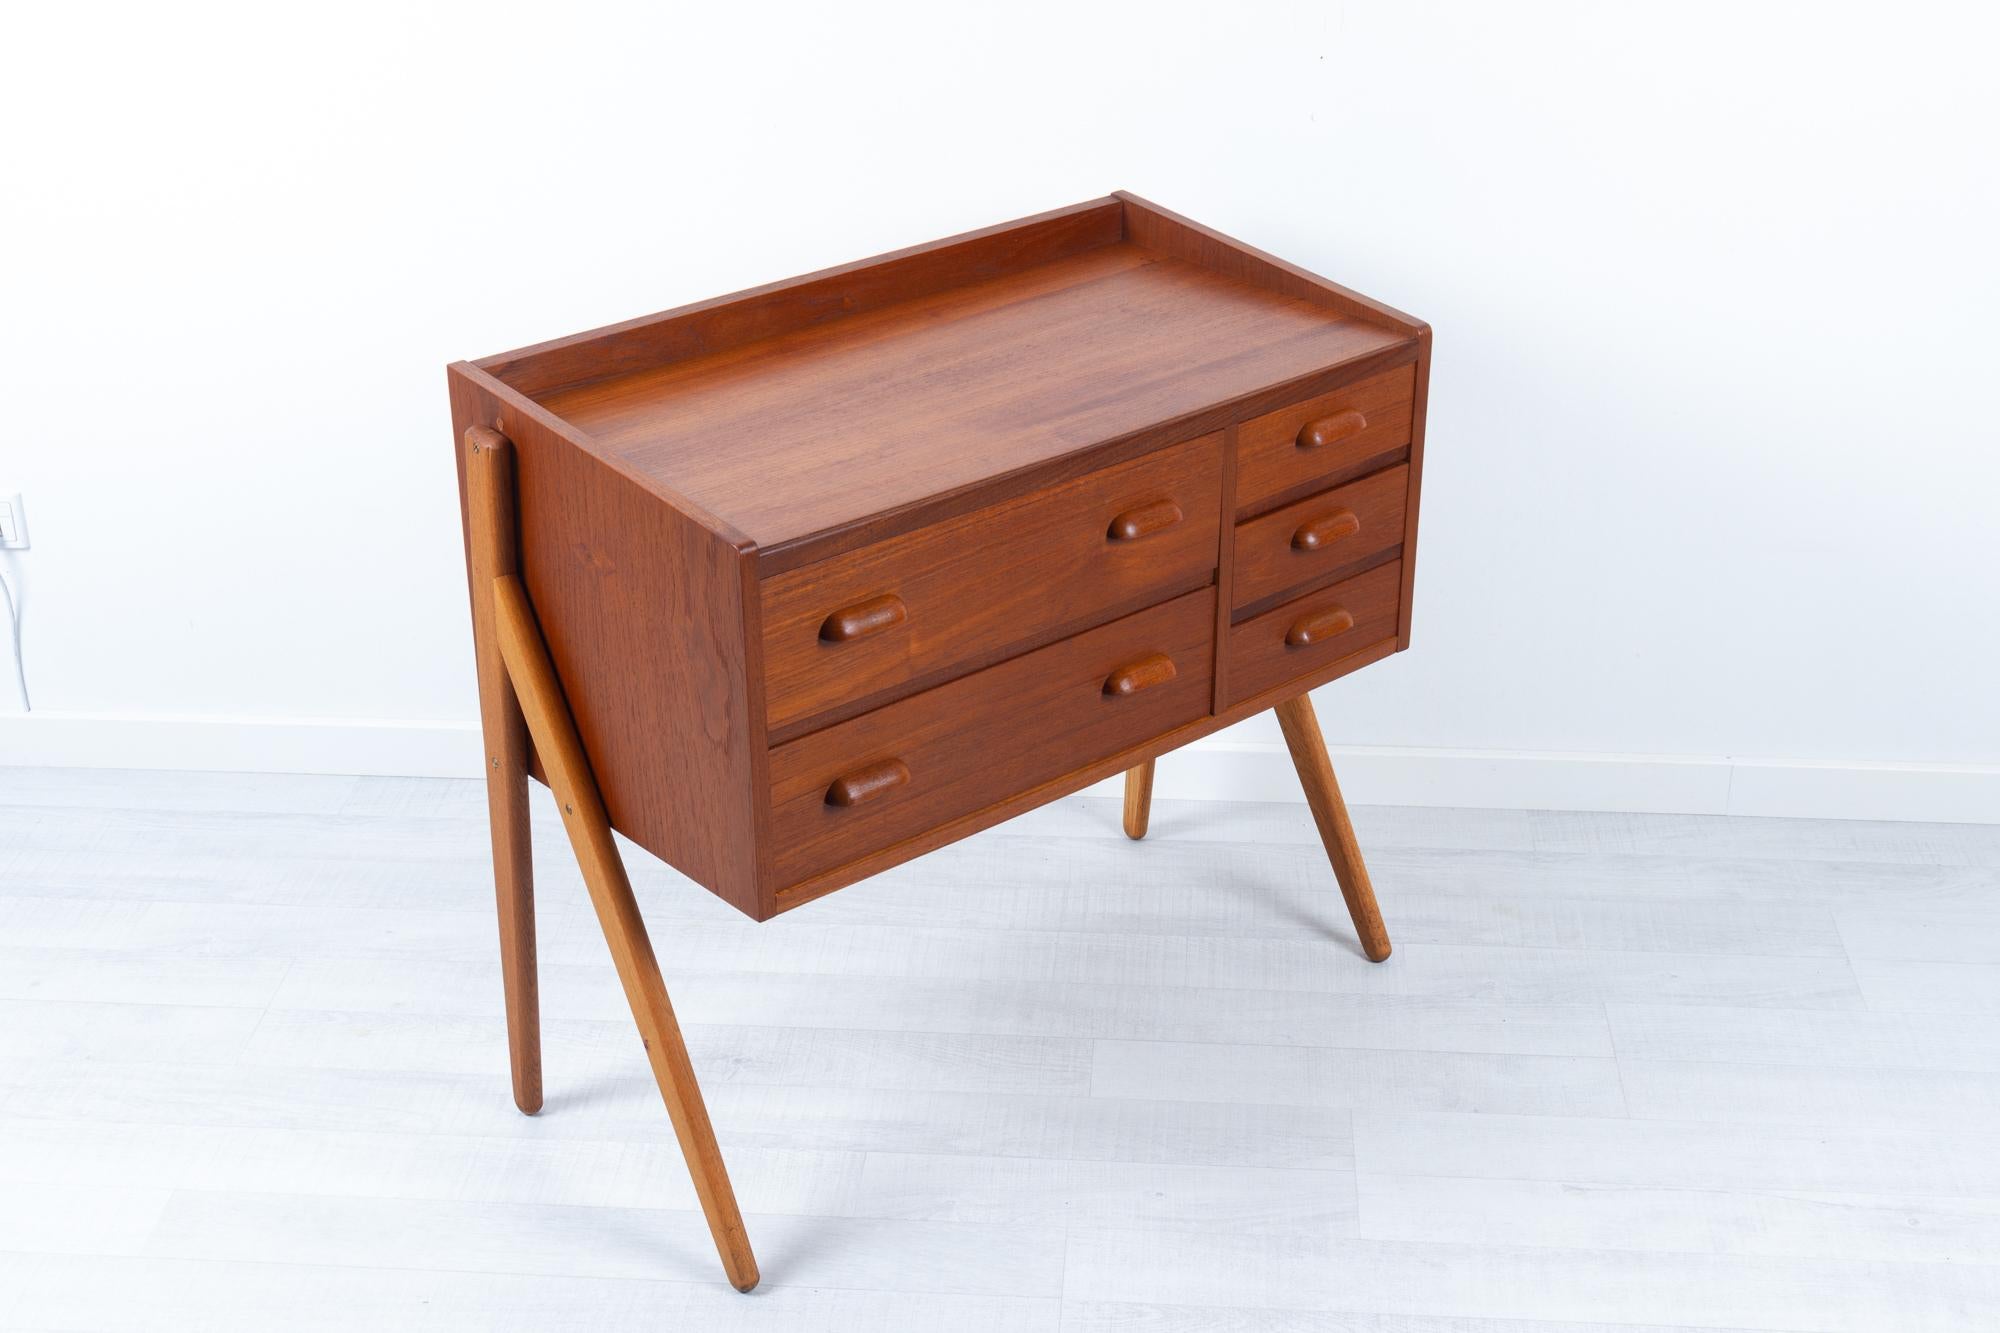 Vintage Danish teak vanity 1960s
Elegant Danish Mid-Century Modern teak dressing table with five drawers. Drawers with sculpted pulls in solid teak. Rounded Y-shaped legs in solid oak.

It originally had a mirror attached, but this has been